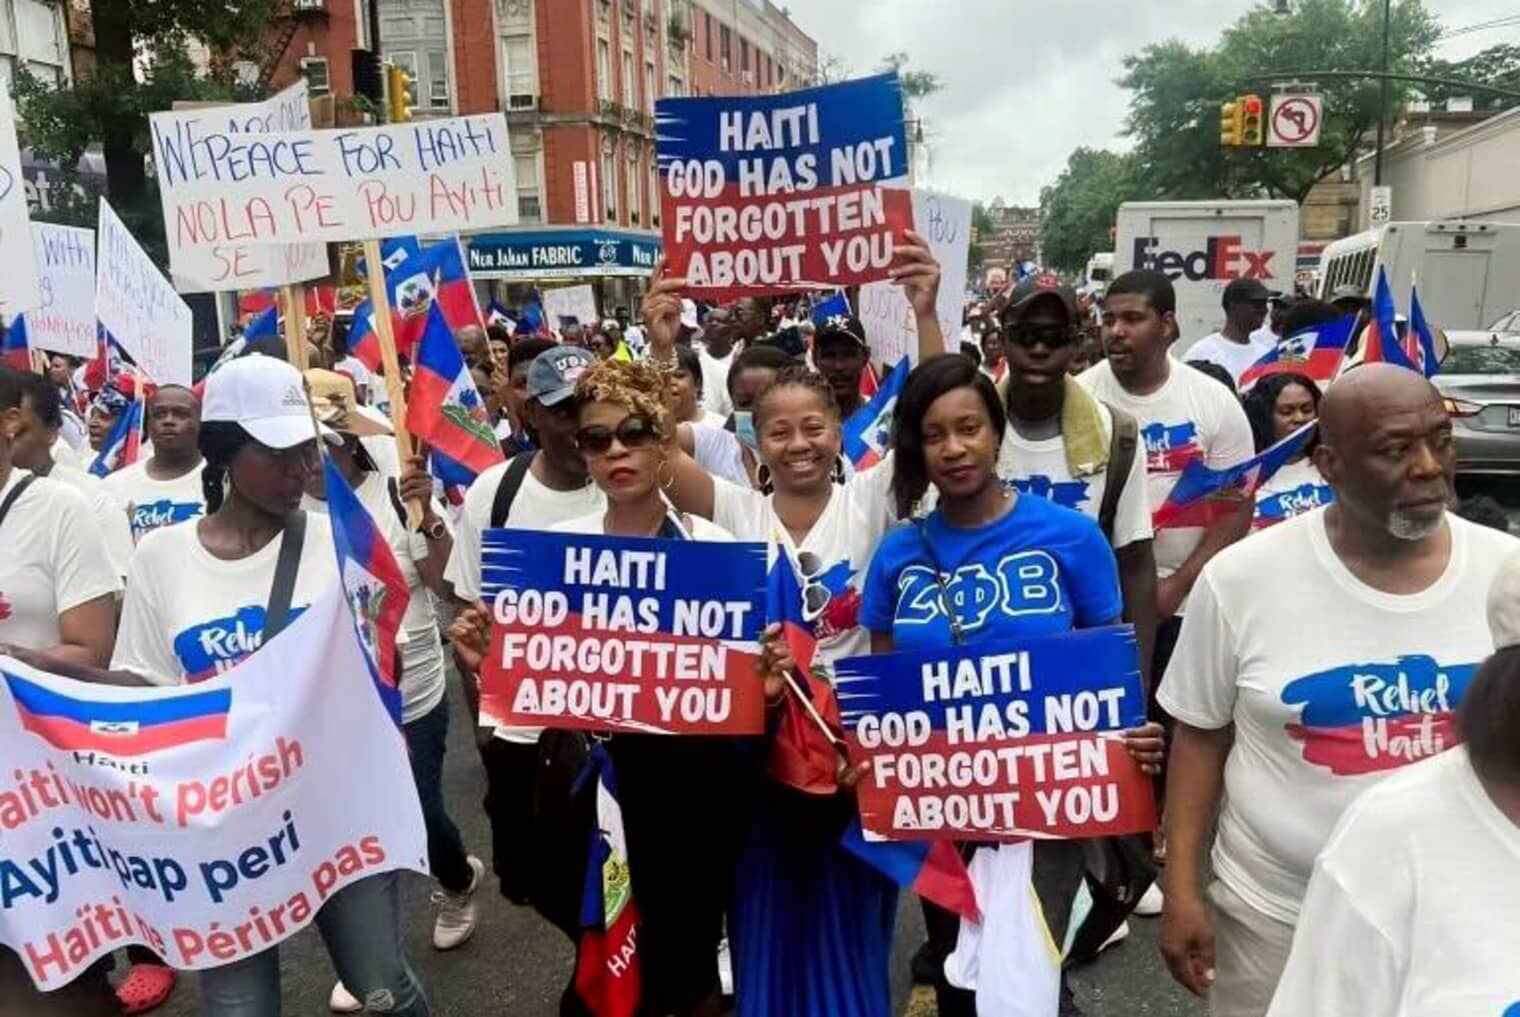 Haitians around the world call for action to stop gang violence